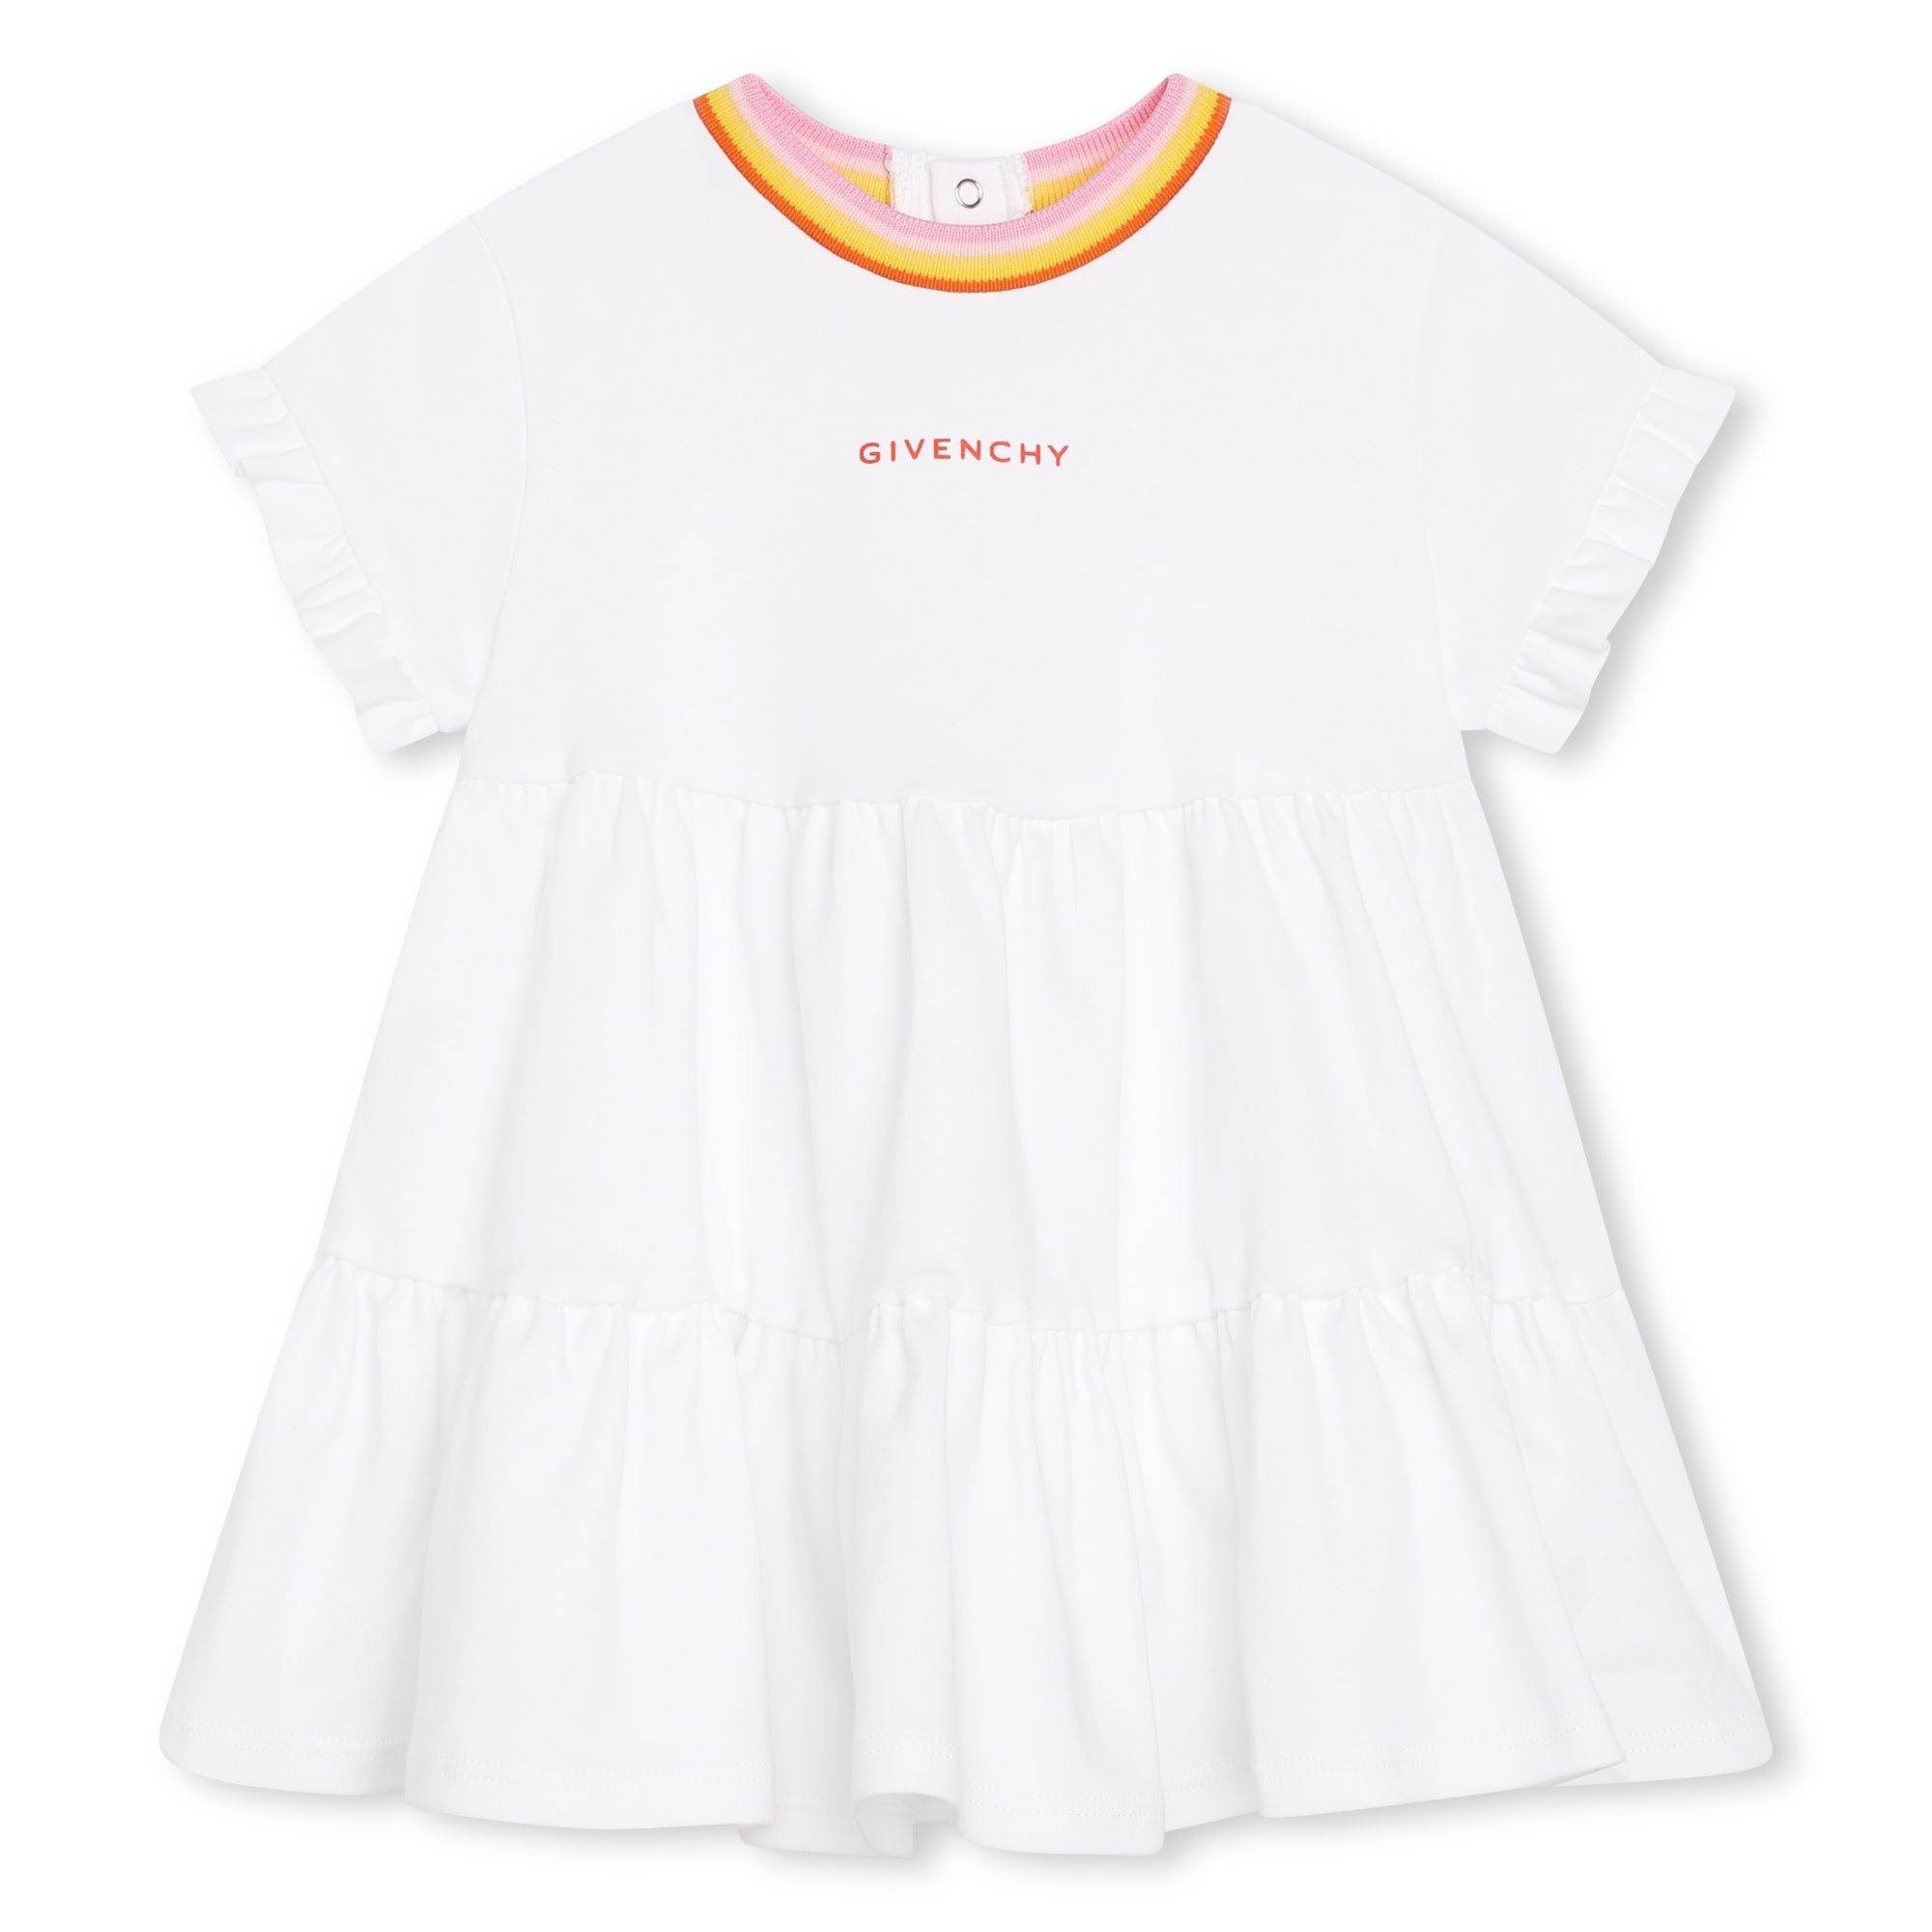 Givenchy Short Sleeved Dress Style: H02102